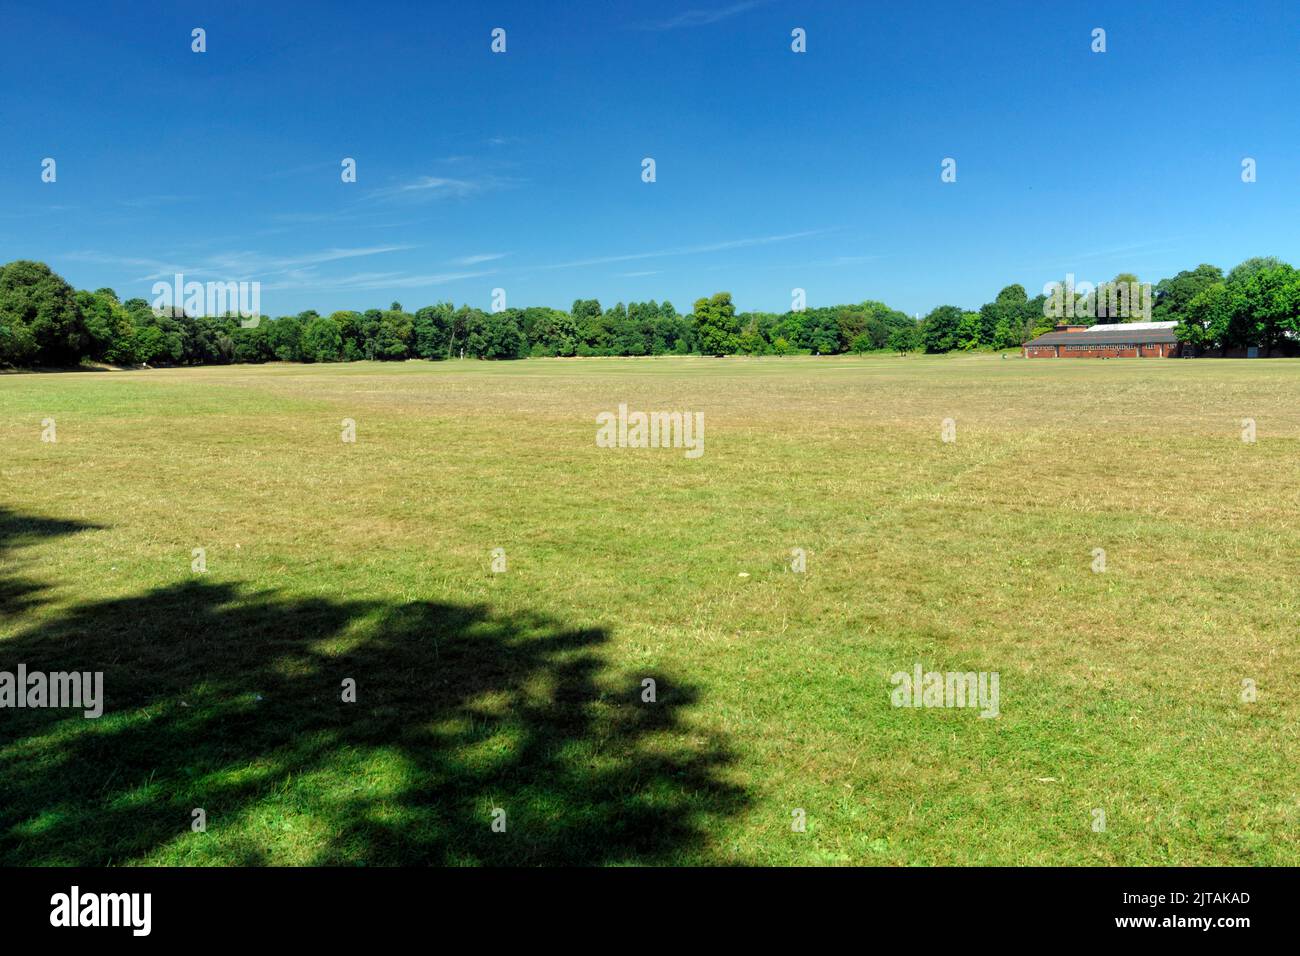 Blackwier park and changing rooms, Cardiff, Wales. Stock Photo